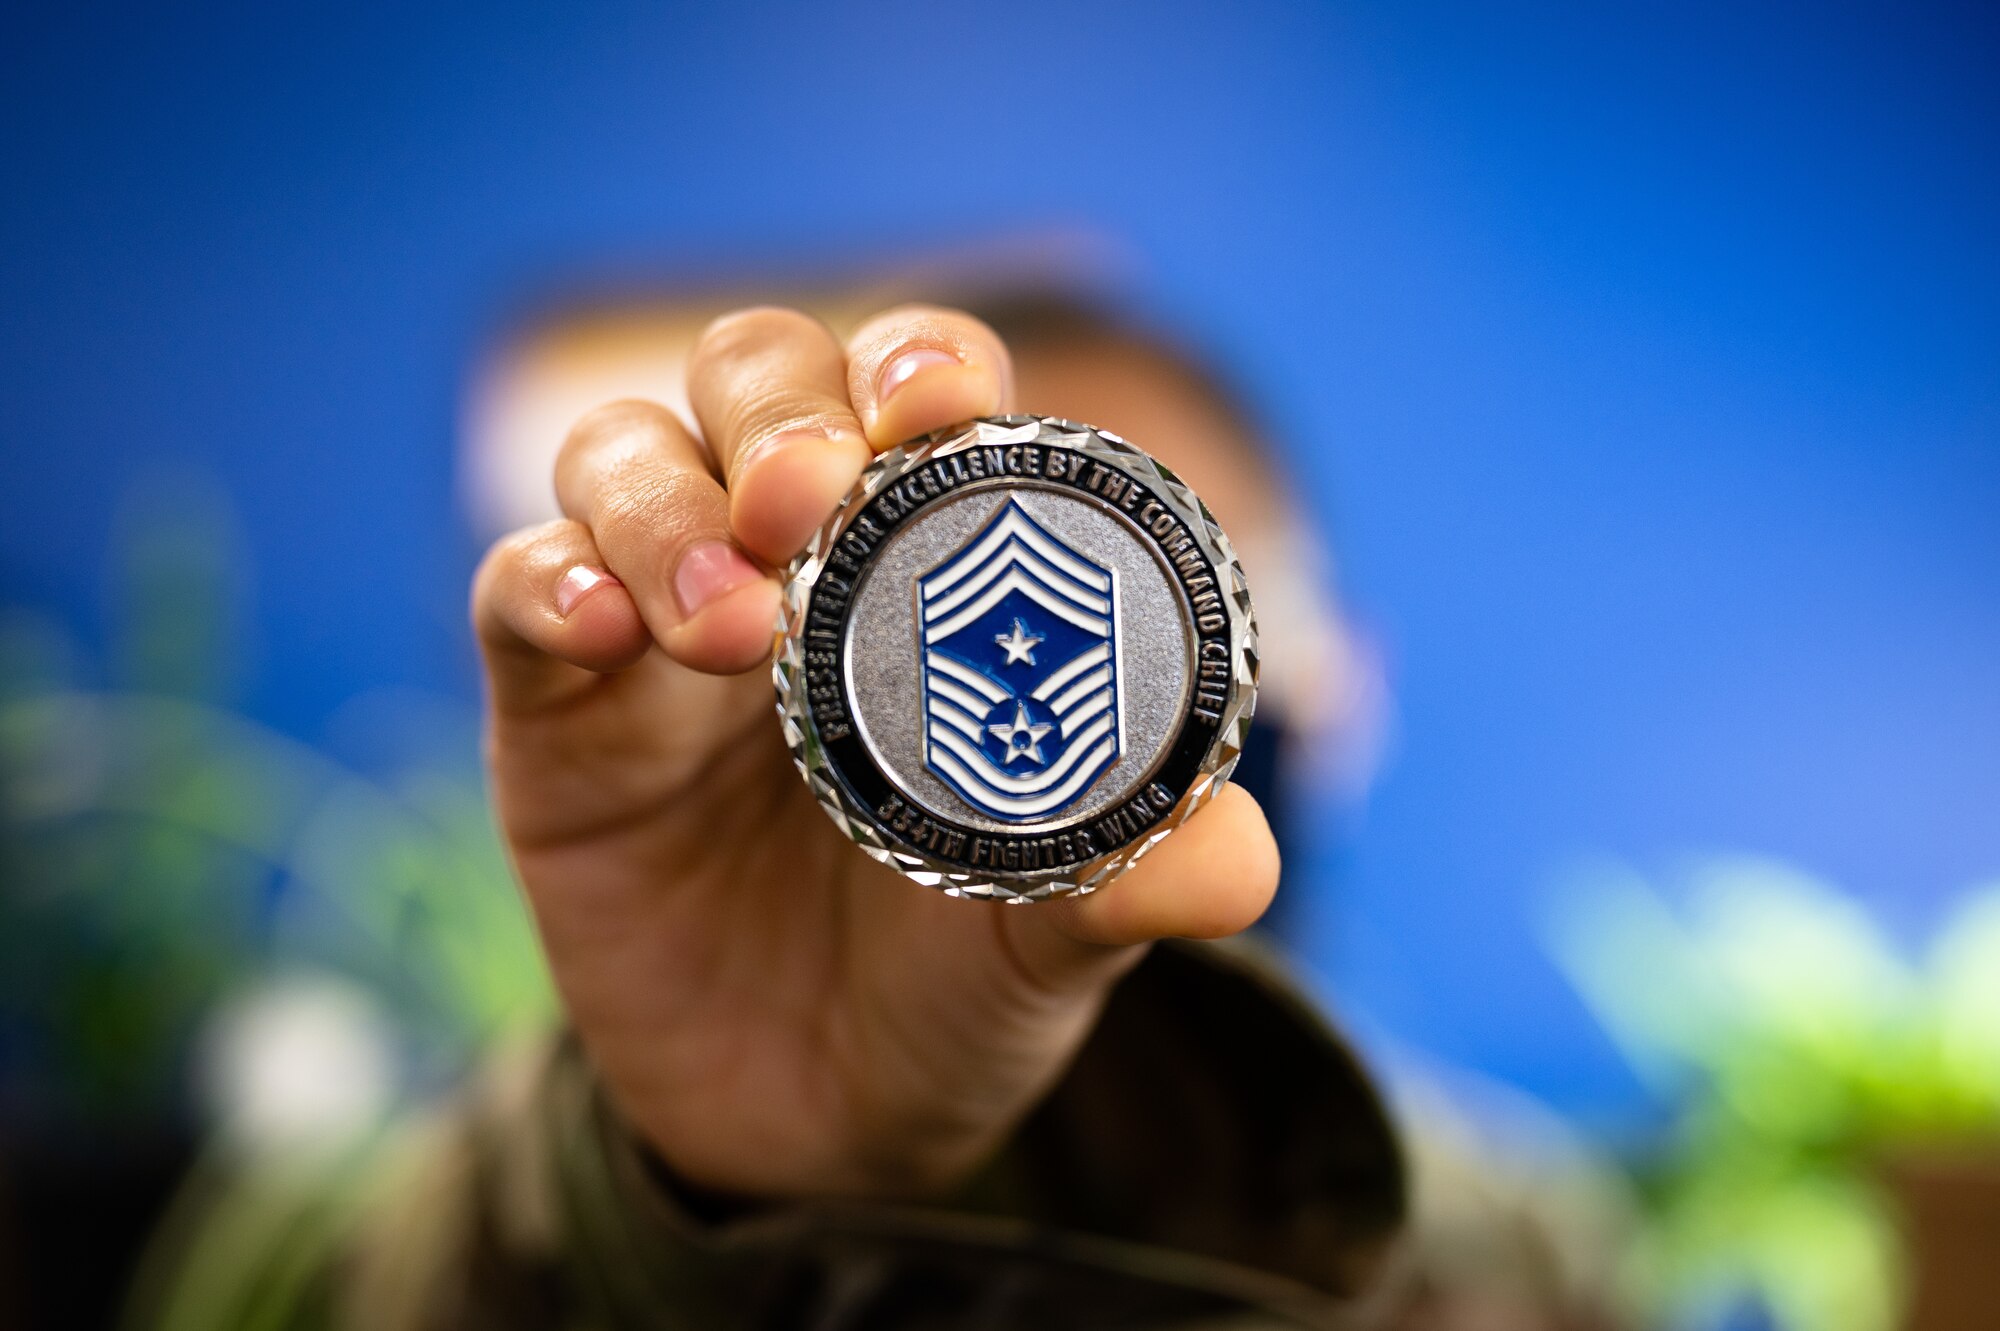 U.S. Air Force Airman 1st Class Helbees Tawadrous, a 354th Contracting Squadron contracting specialist, holds out a 354th Fighter Wing command chief coin on Eielson Air Force Base, Alaska, Sept. 8, 2021.